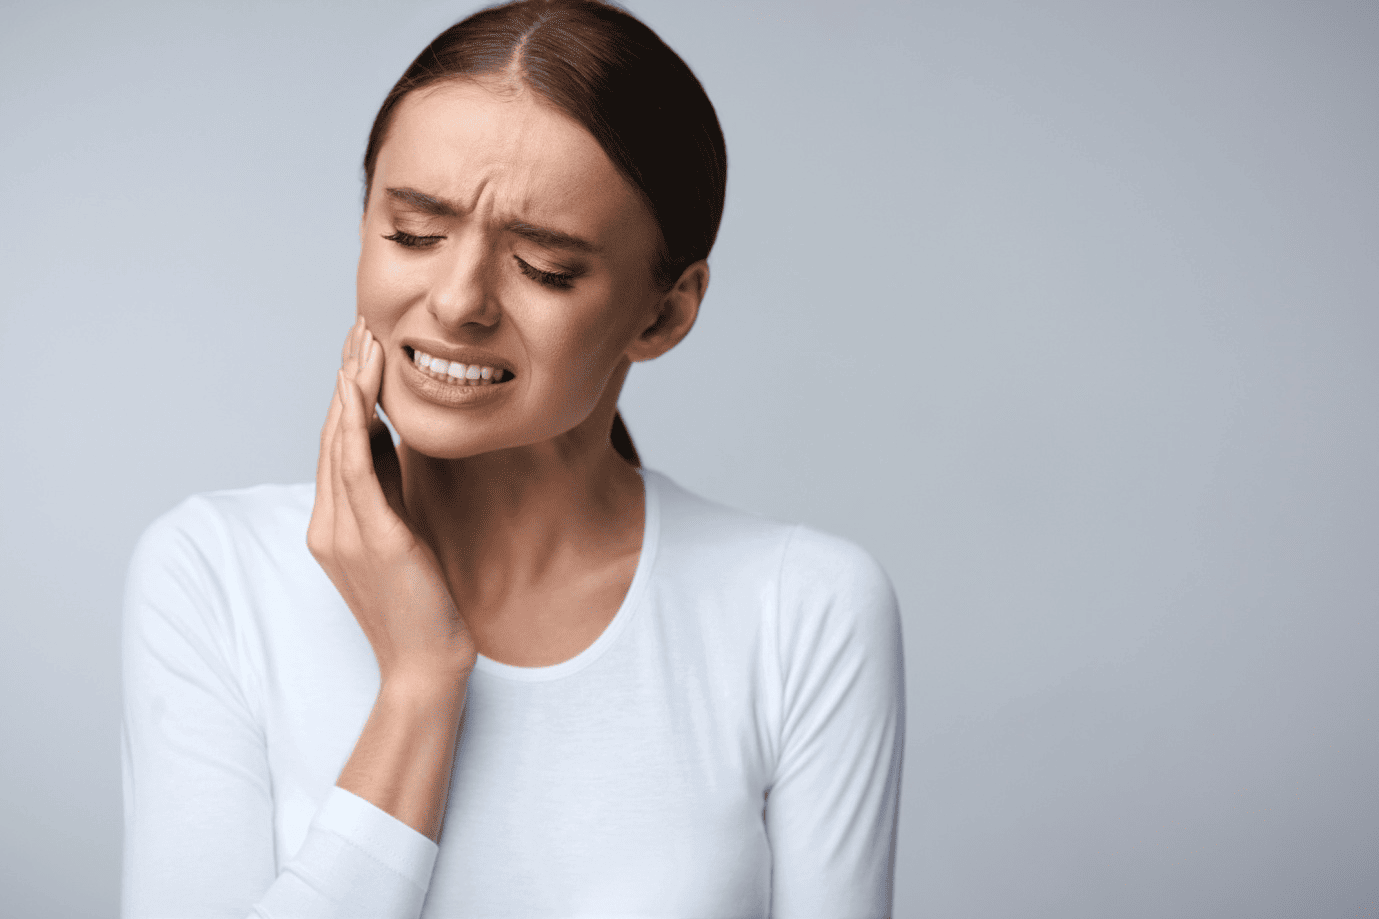 5 Tips For Coping With A Cracked Tooth 1